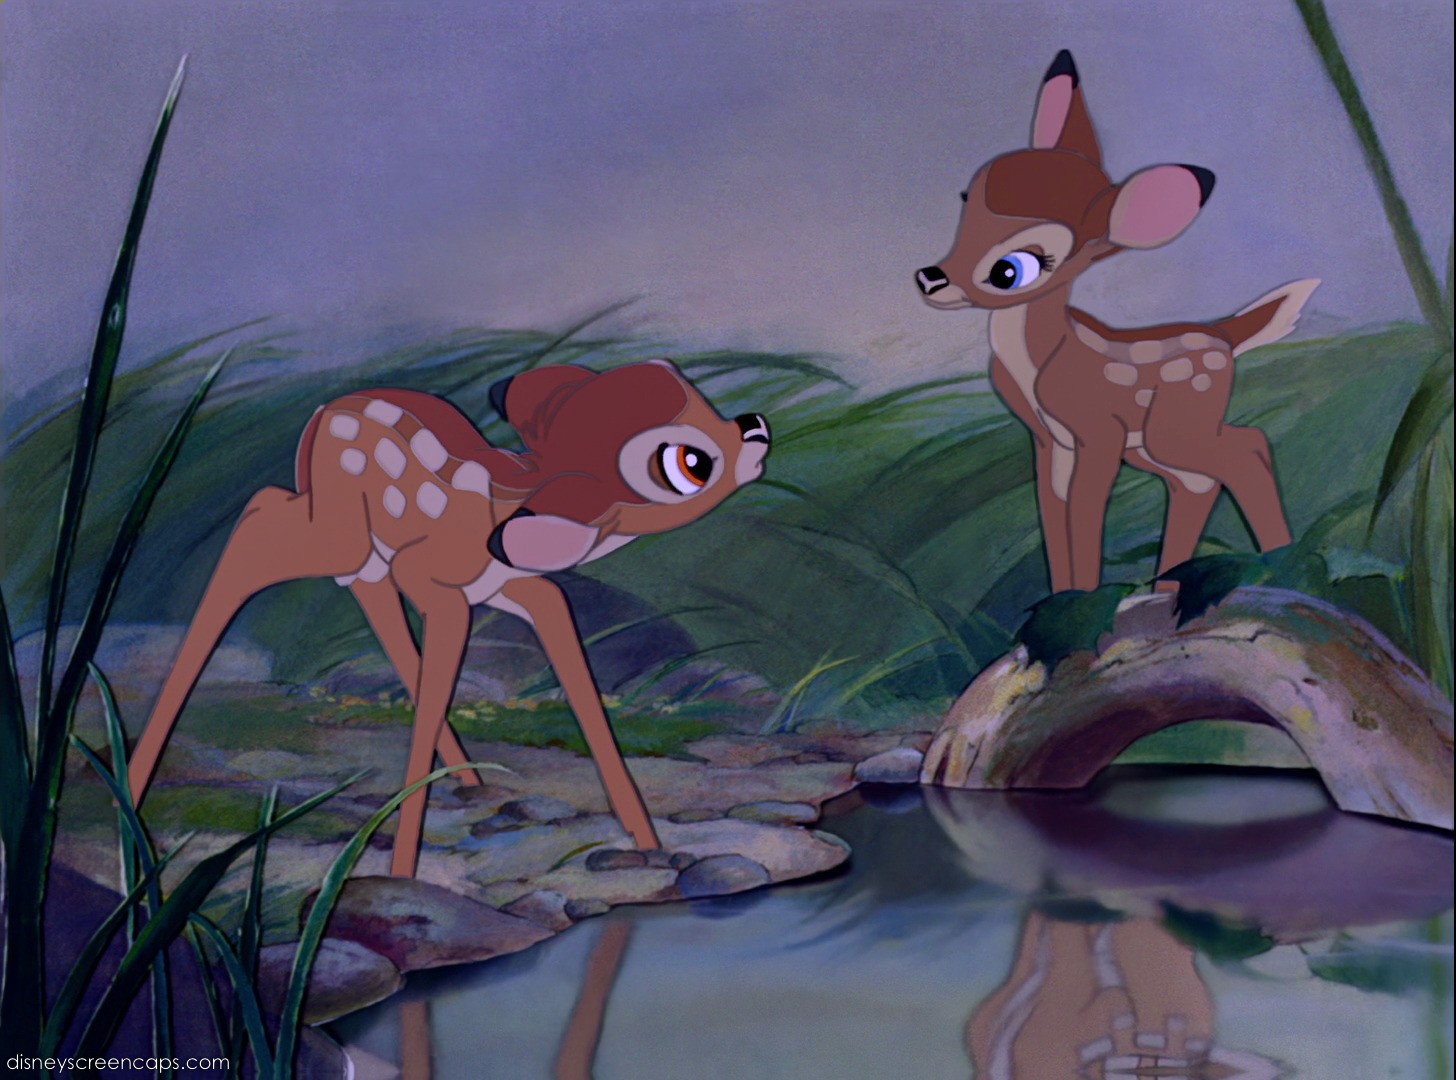 What did the child who voiced Bambi grow up to be?